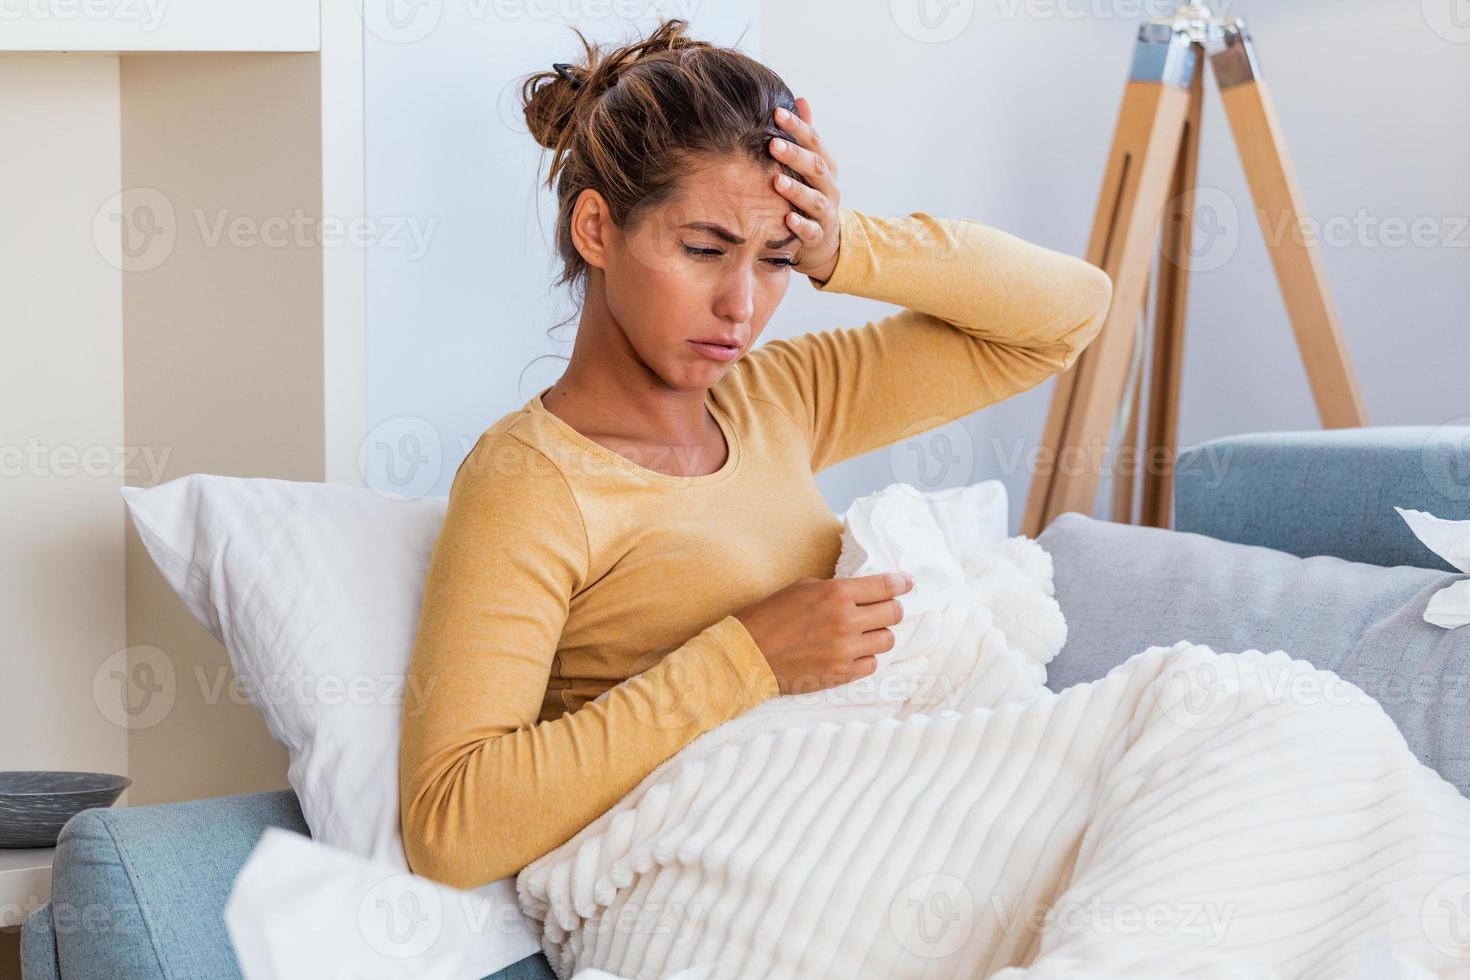 Sick woman with headache sitting under the blanket. Sick woman with seasonal infections, flu, allergy lying in bed. Sick woman covered with a blanket lying in bed with high fever and a flu, resting. photo